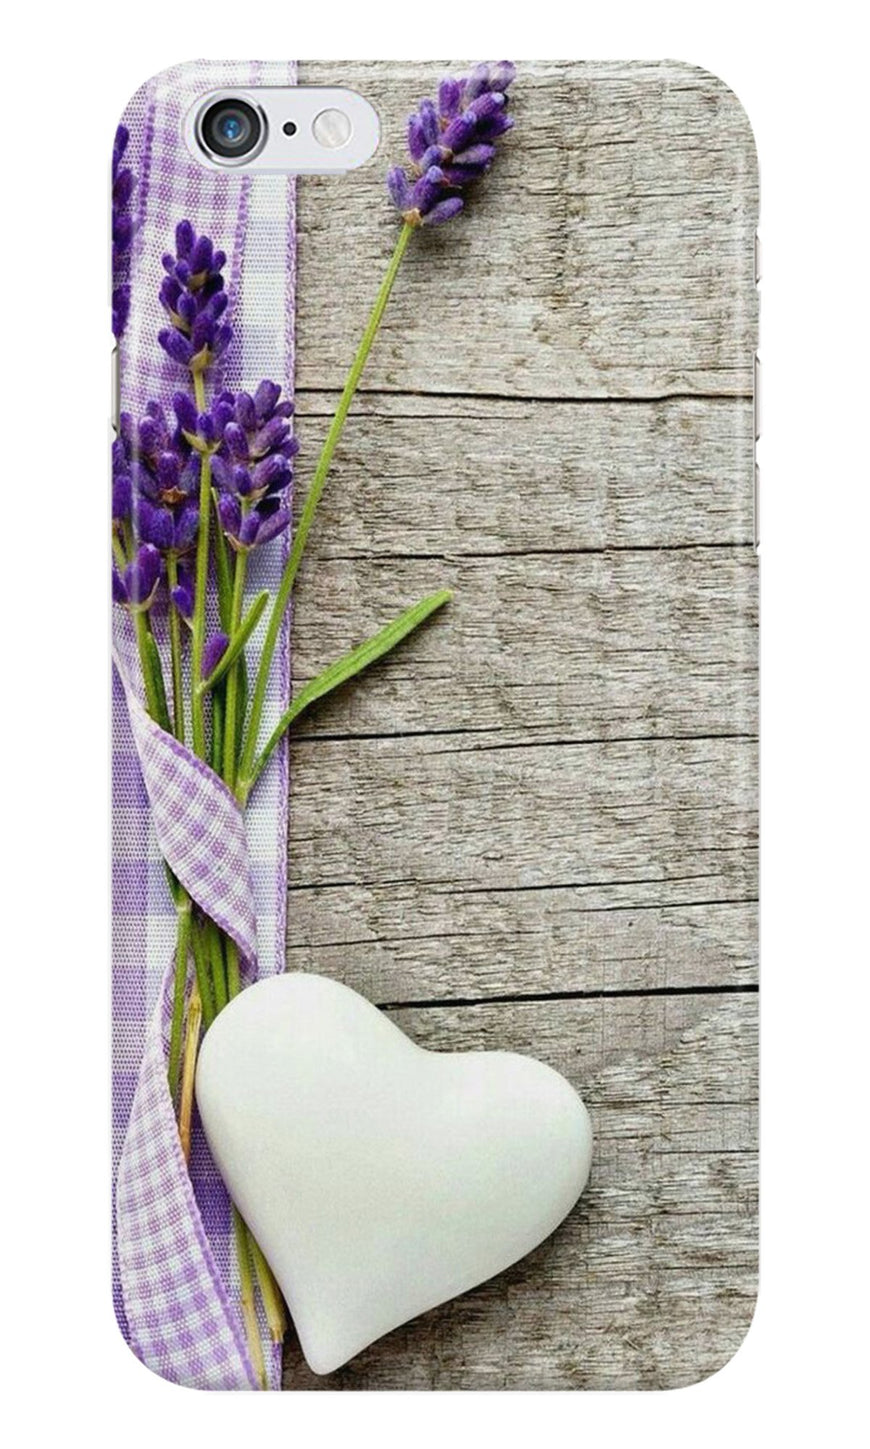 White Heart Case for Iphone 6/6S (Design No. 298)